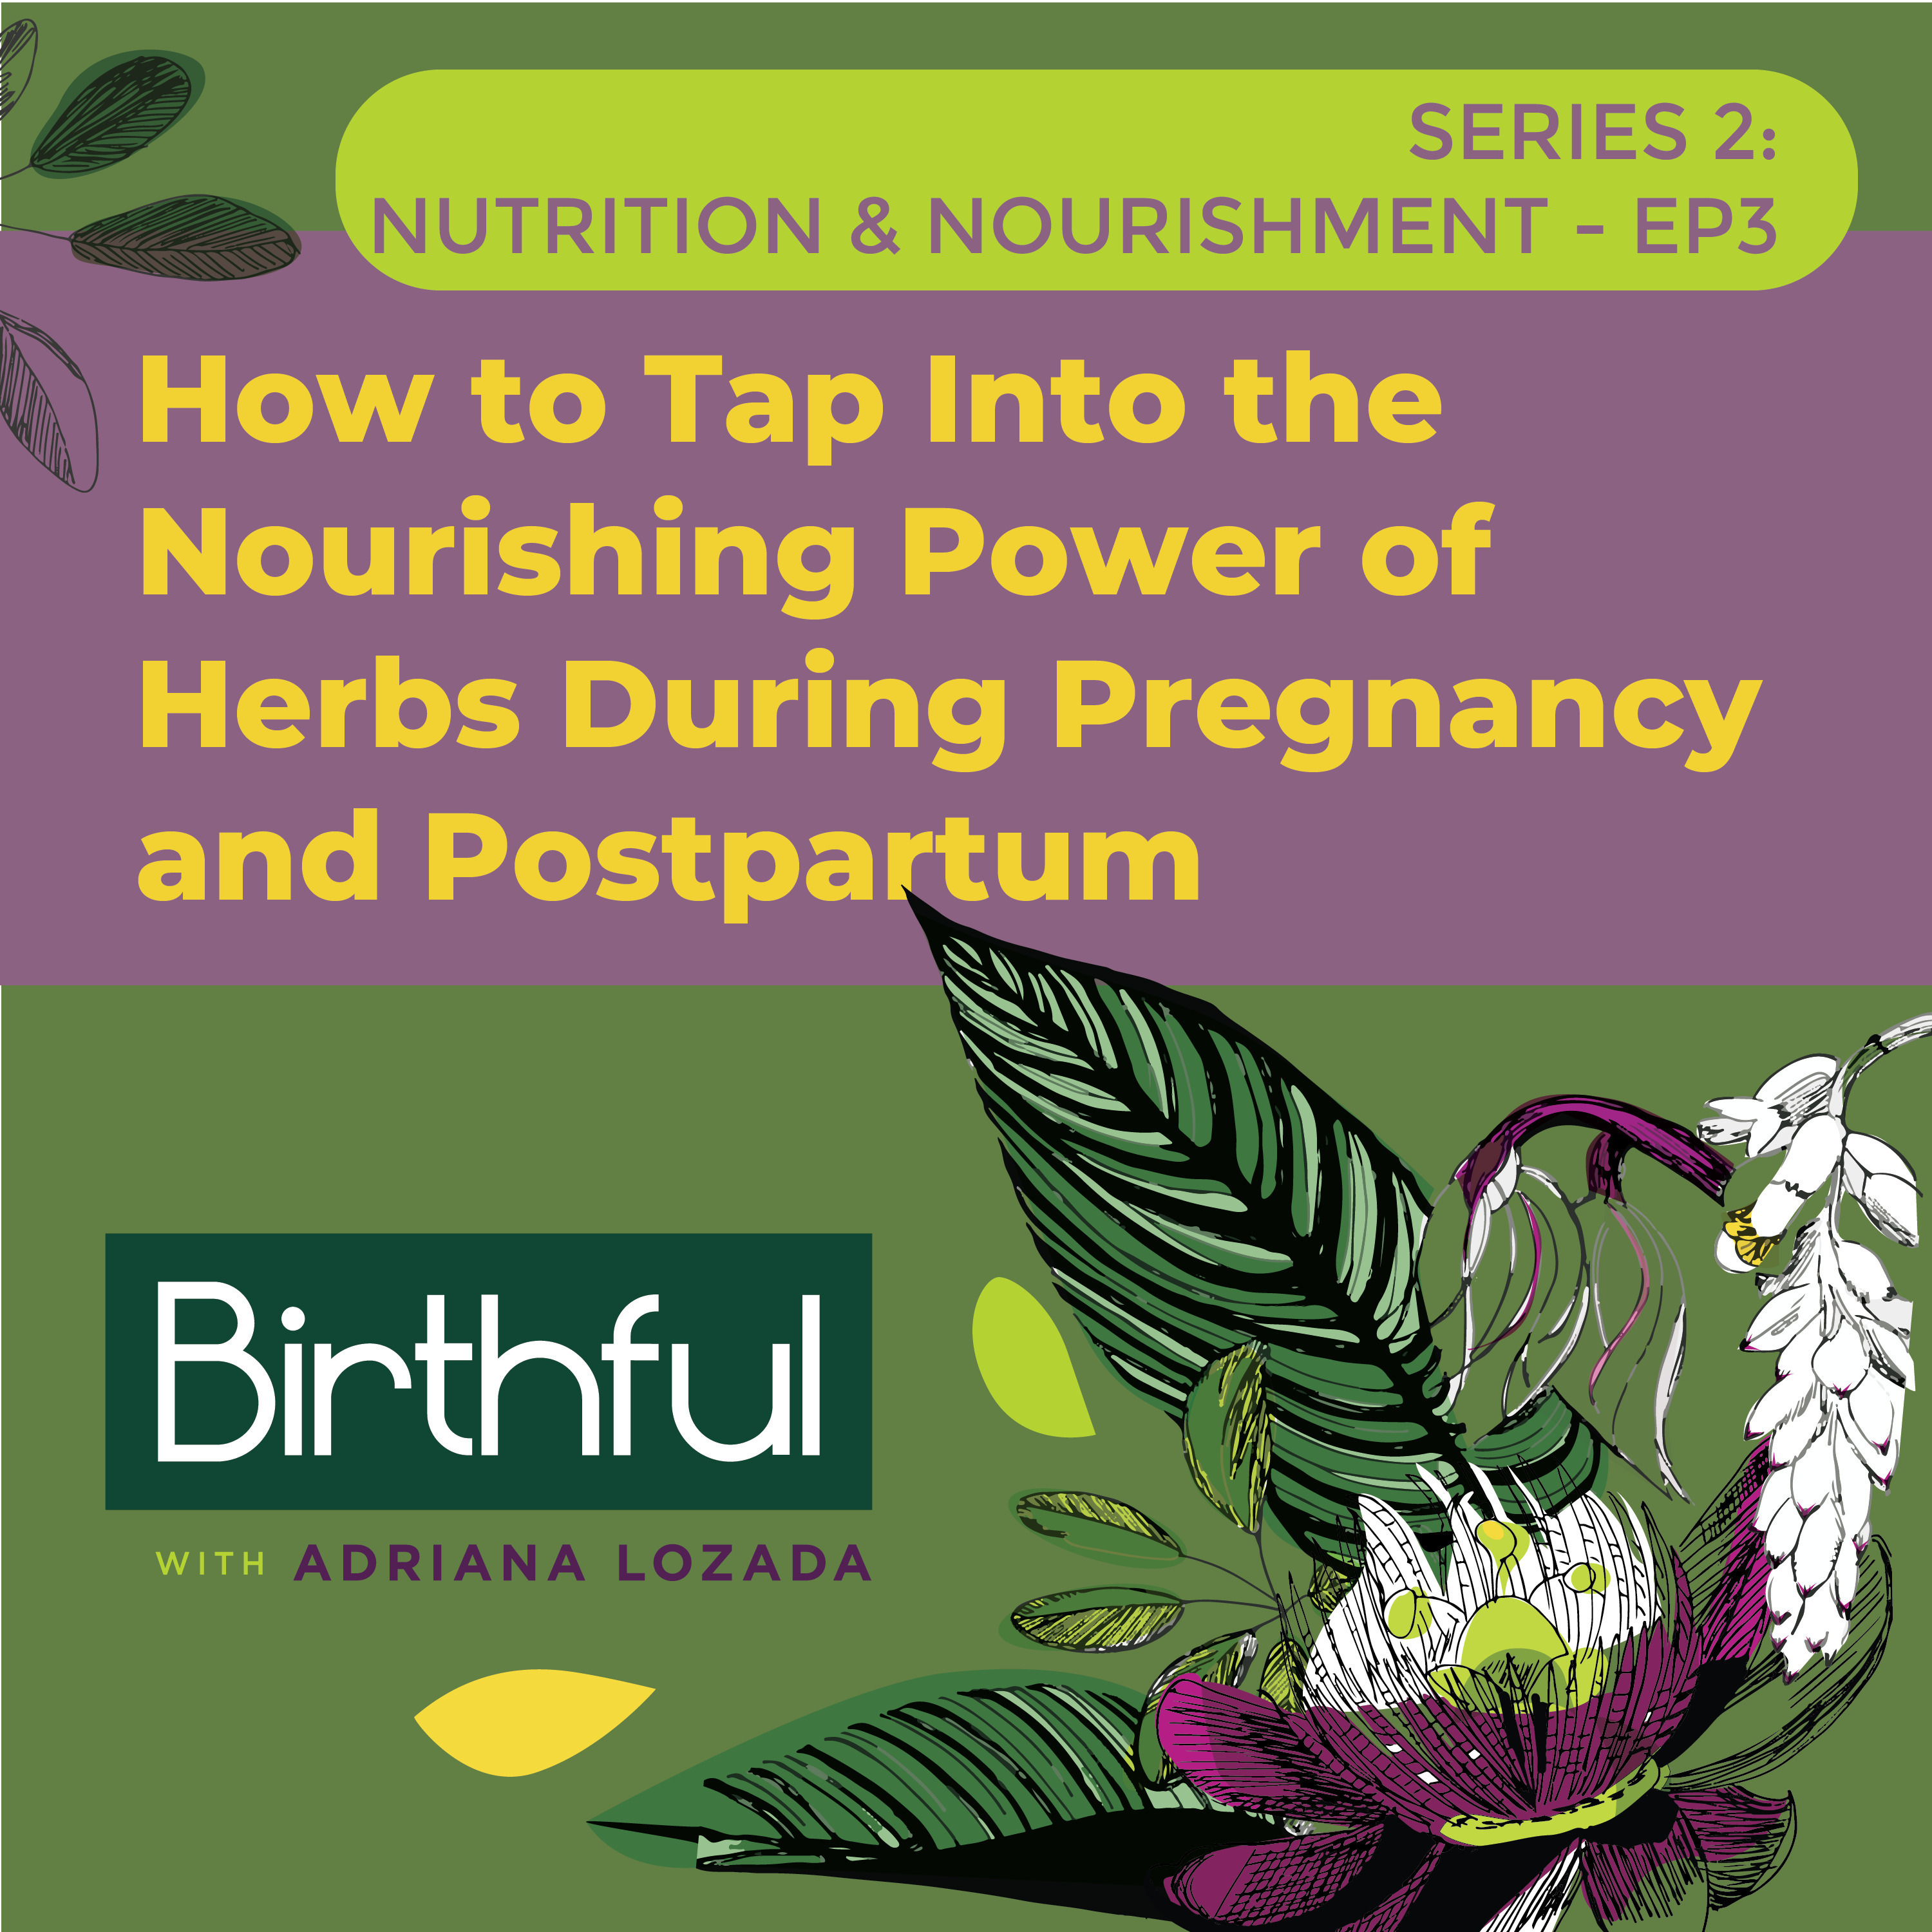 How to Tap Into the Nourishing Power of Herbs During Pregnancy and Postpartum